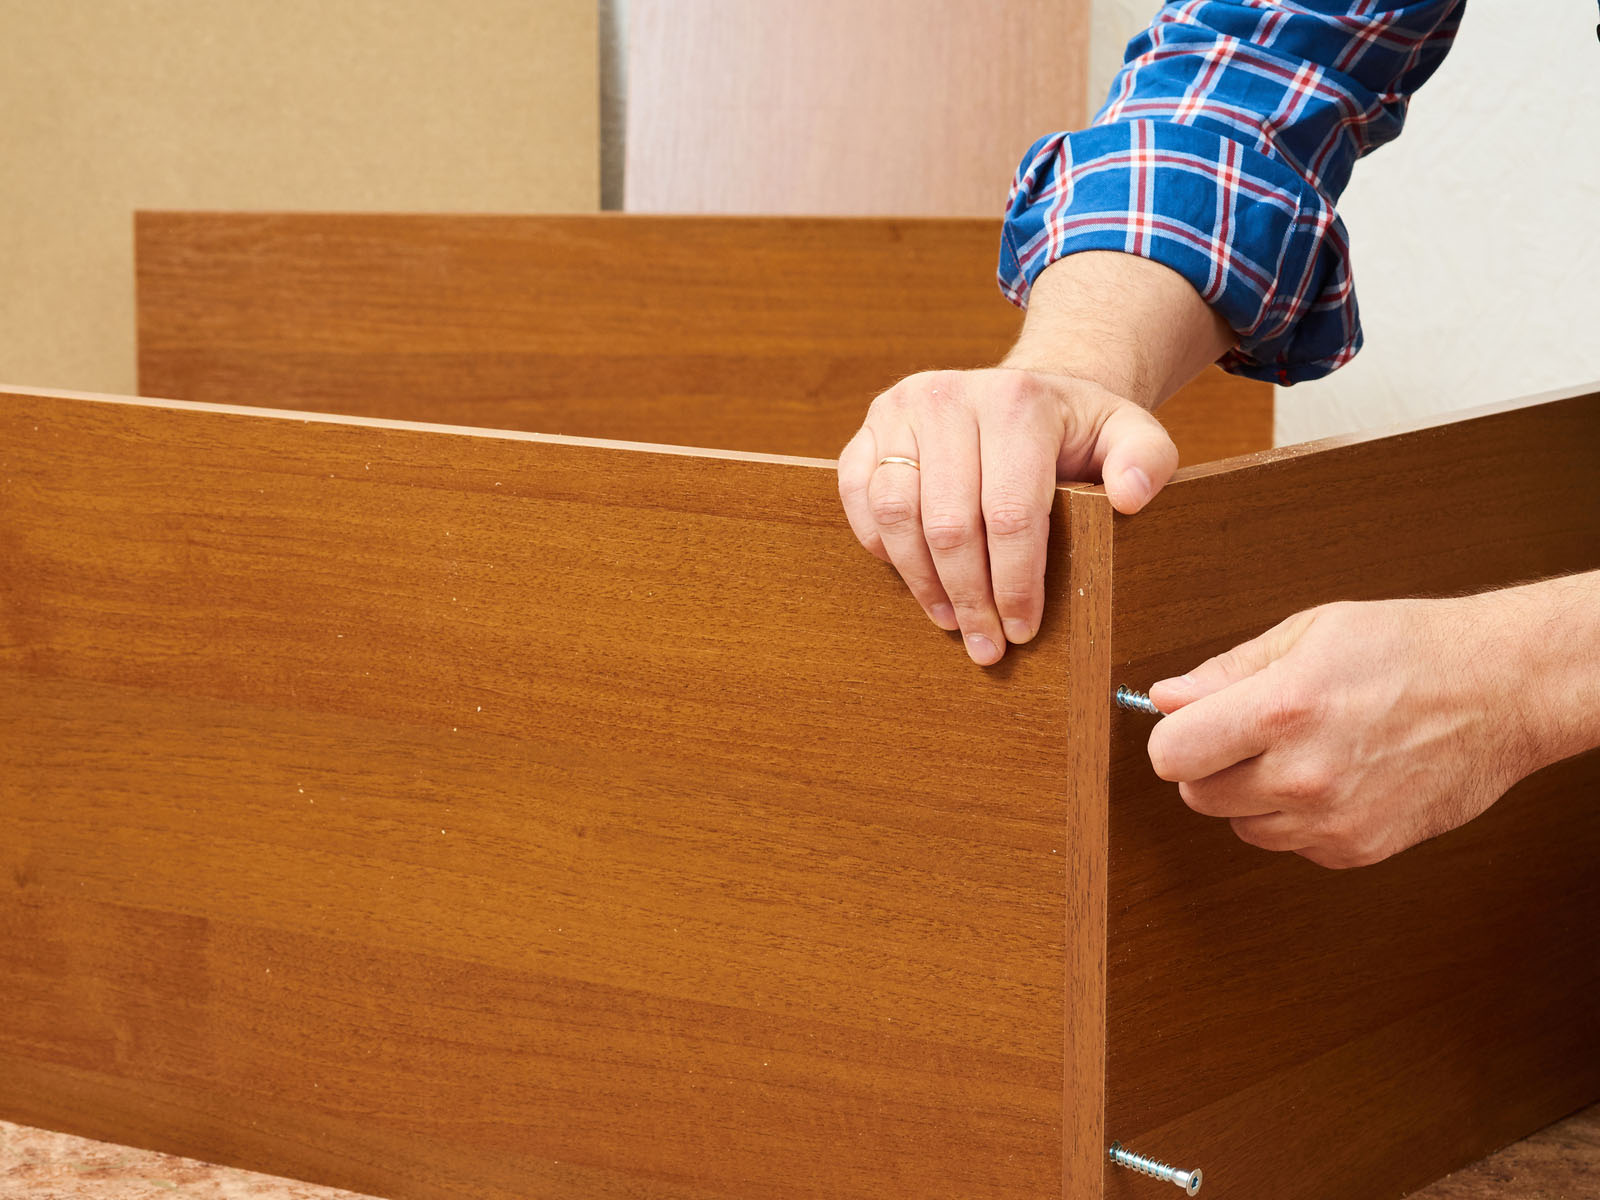 Through TaskRabbit, you can get hired to do things like house cleaning, running errands, and assembling IKEA furniture. (Thinkstock)